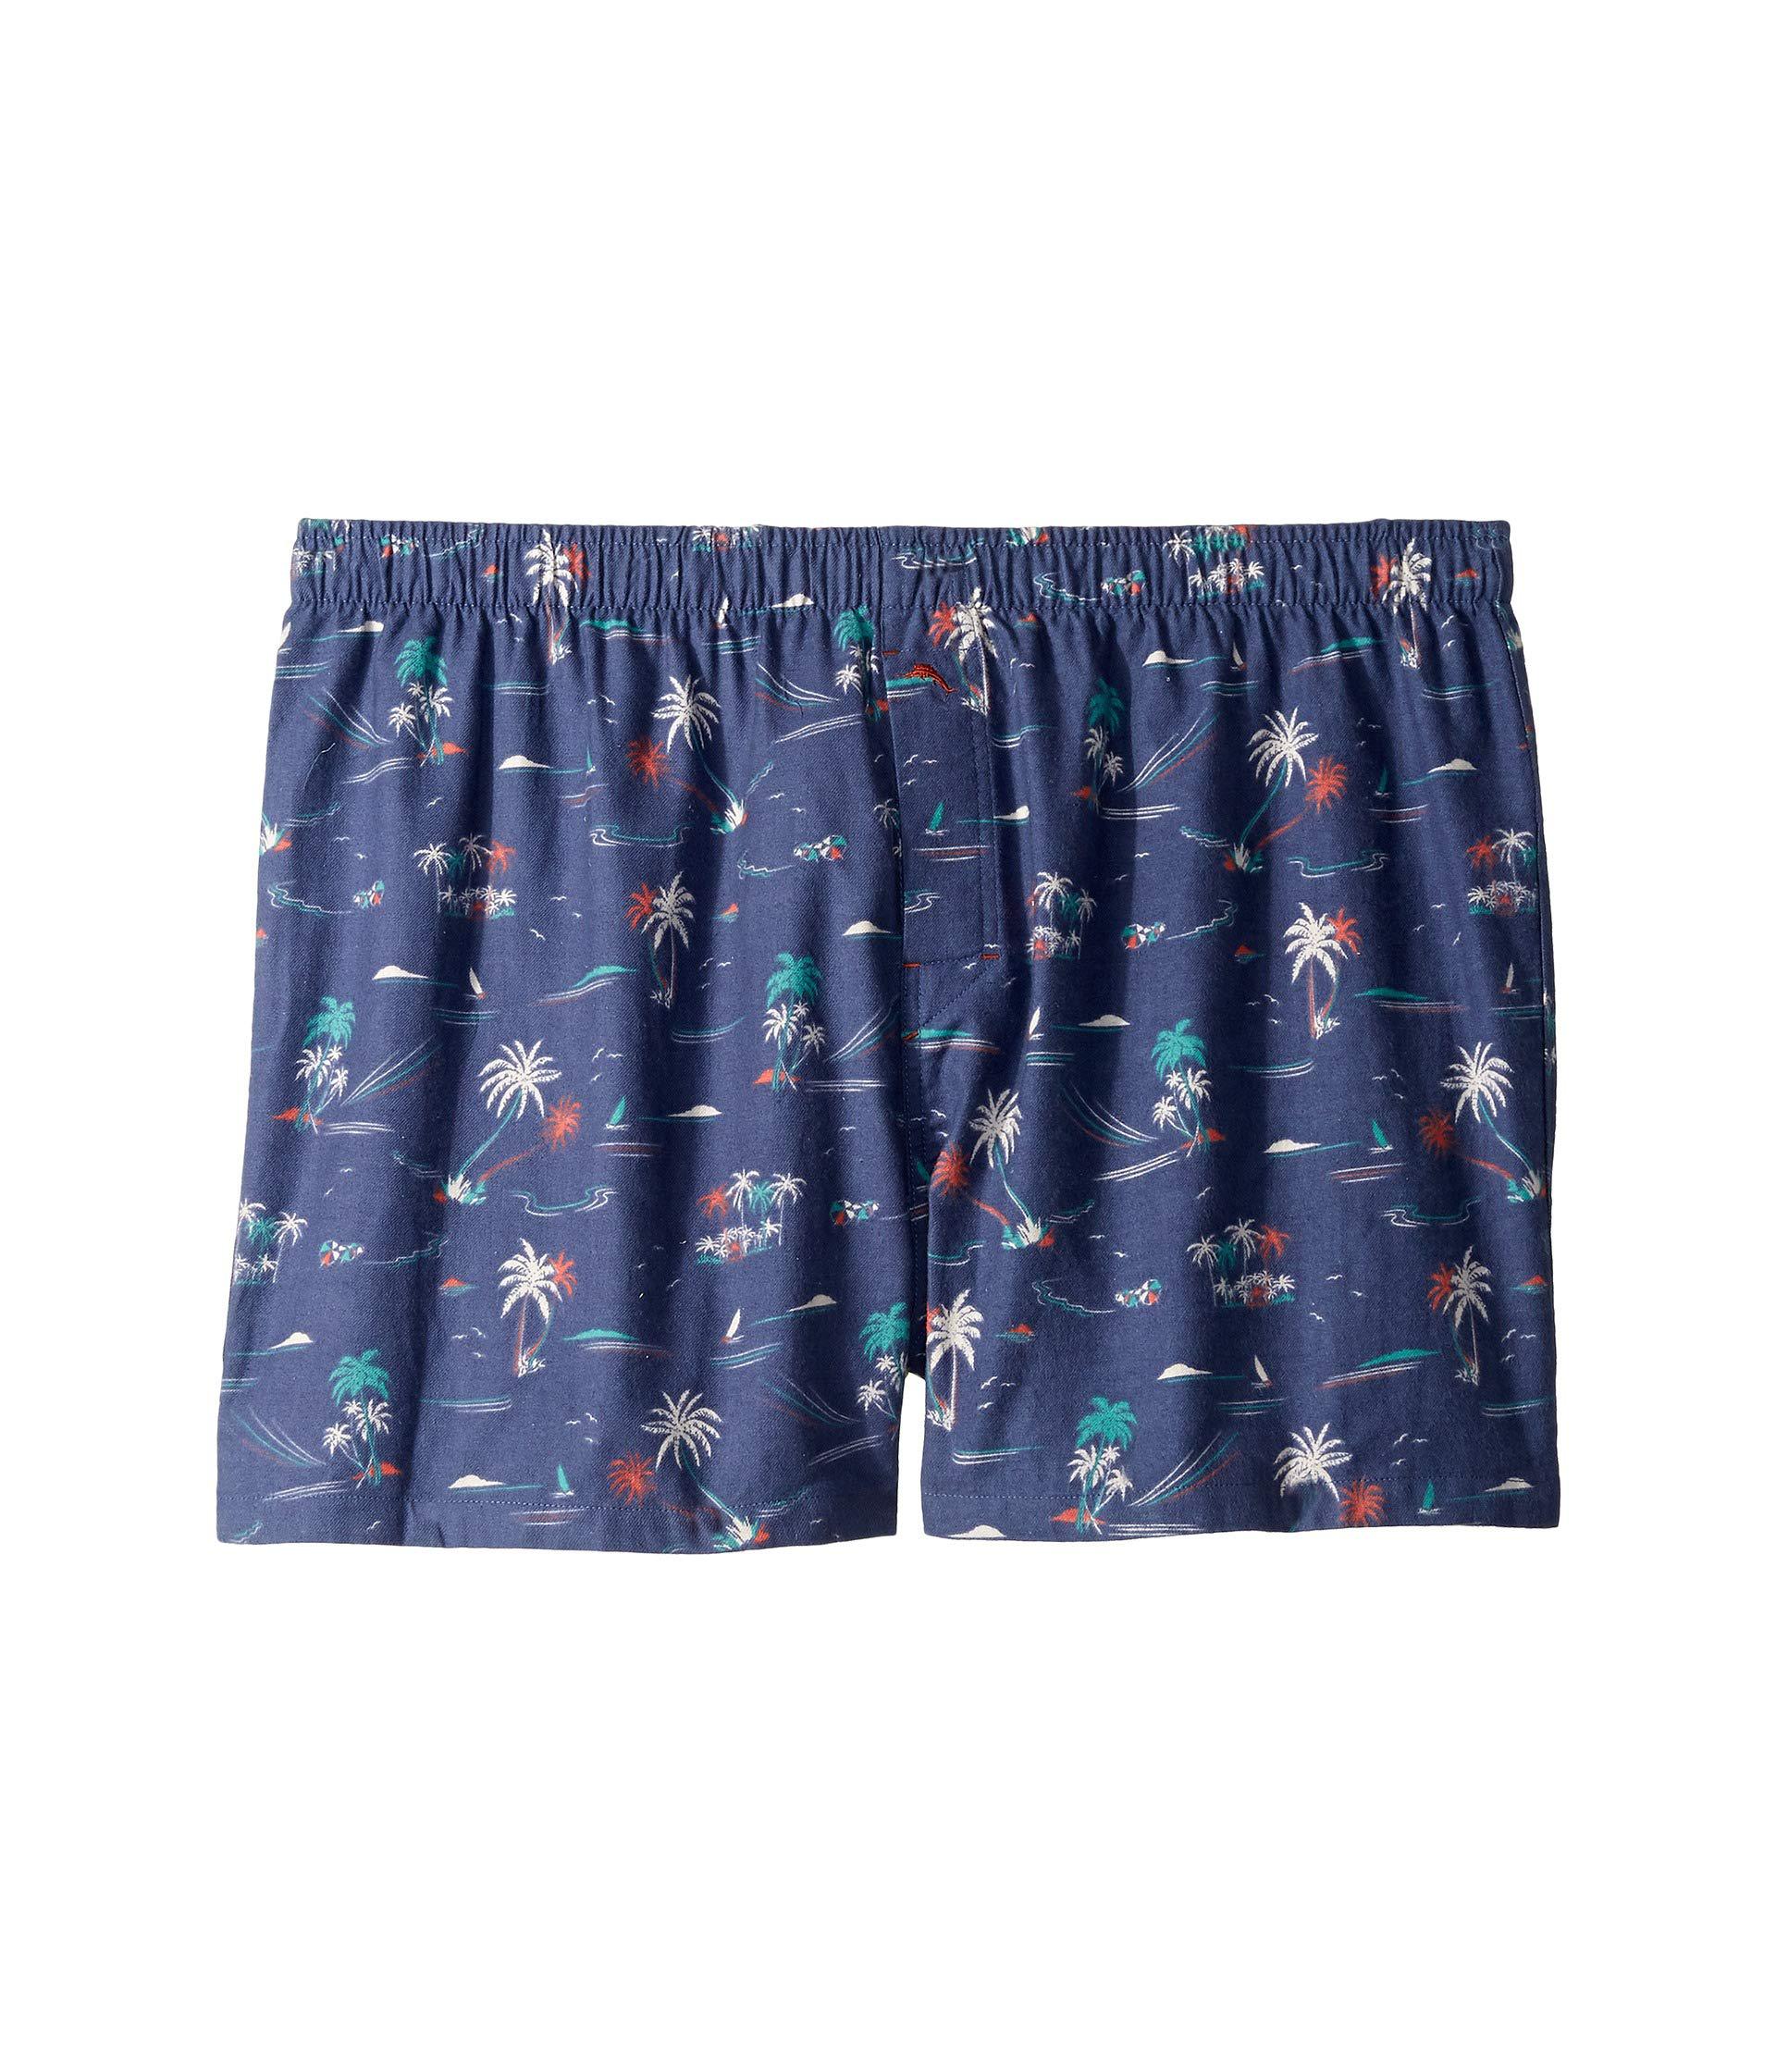 Lyst - Tommy Bahama Printed Flannel Boxer Shorts in Blue for Men